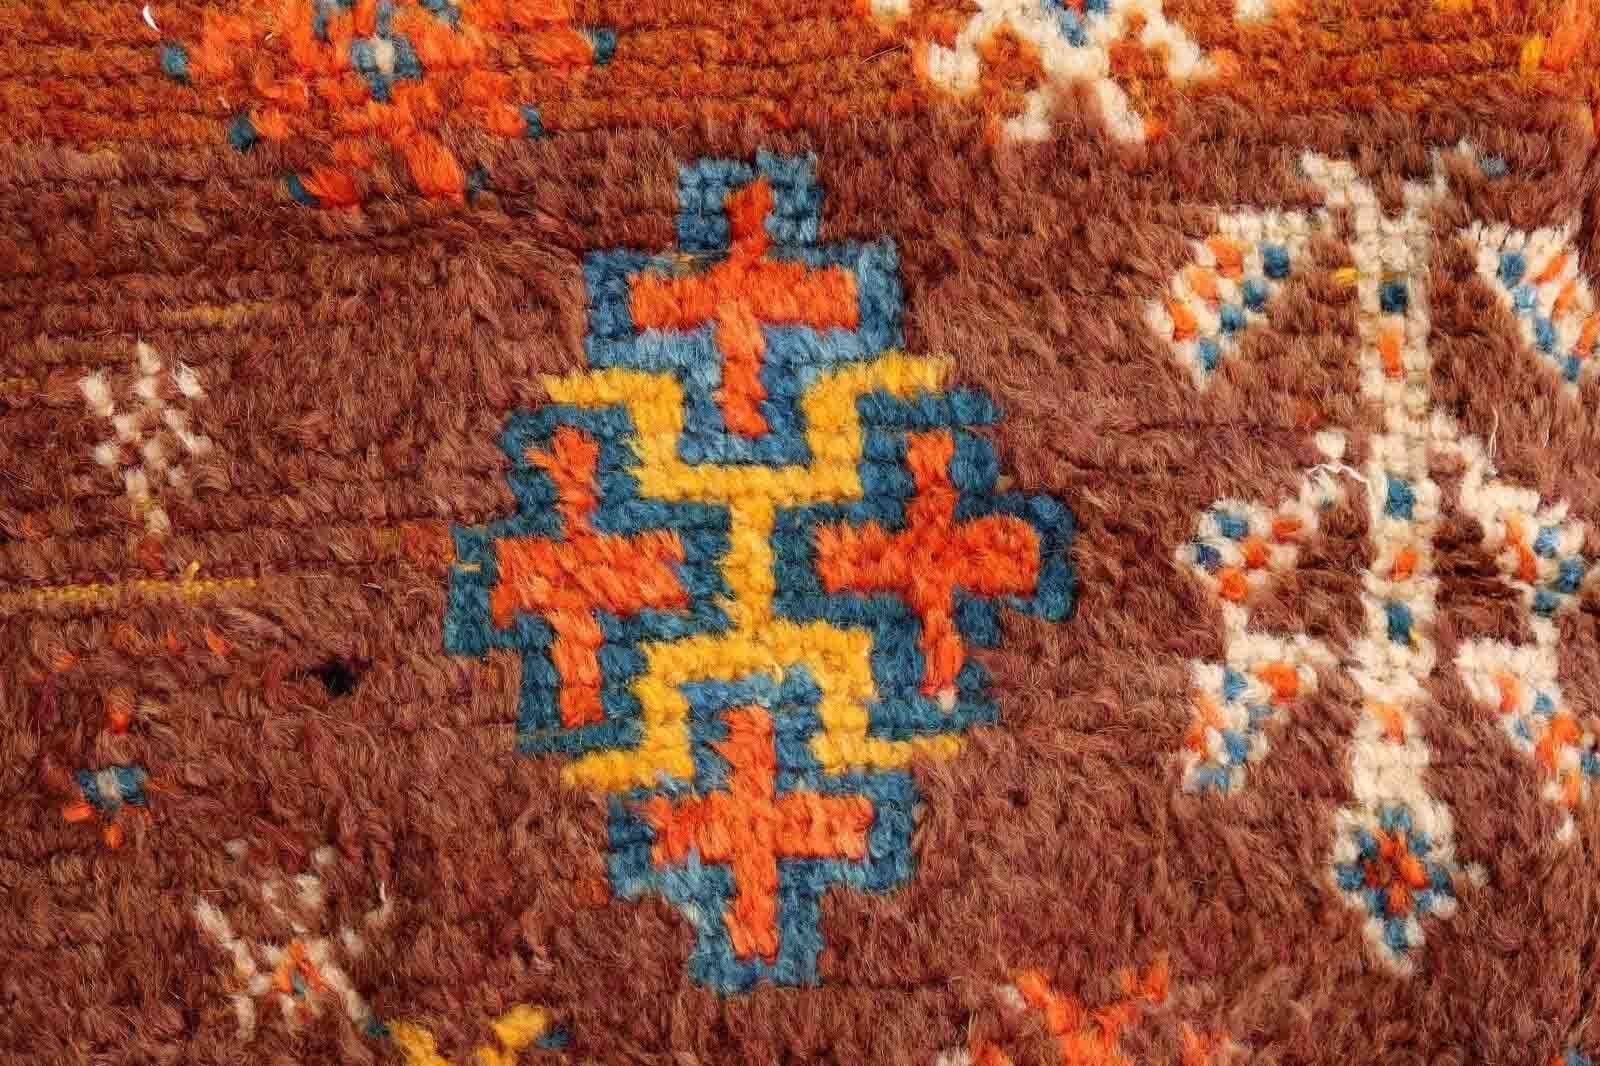 Handmade antique Moroccan Berber rug in rusty red shade and tribal design. The rug is from the beginning of 20th century in original condition, it has some age wear.

-condition: original, some age wear,

-circa: 1900s,

-size: 3.8' x 5.9'